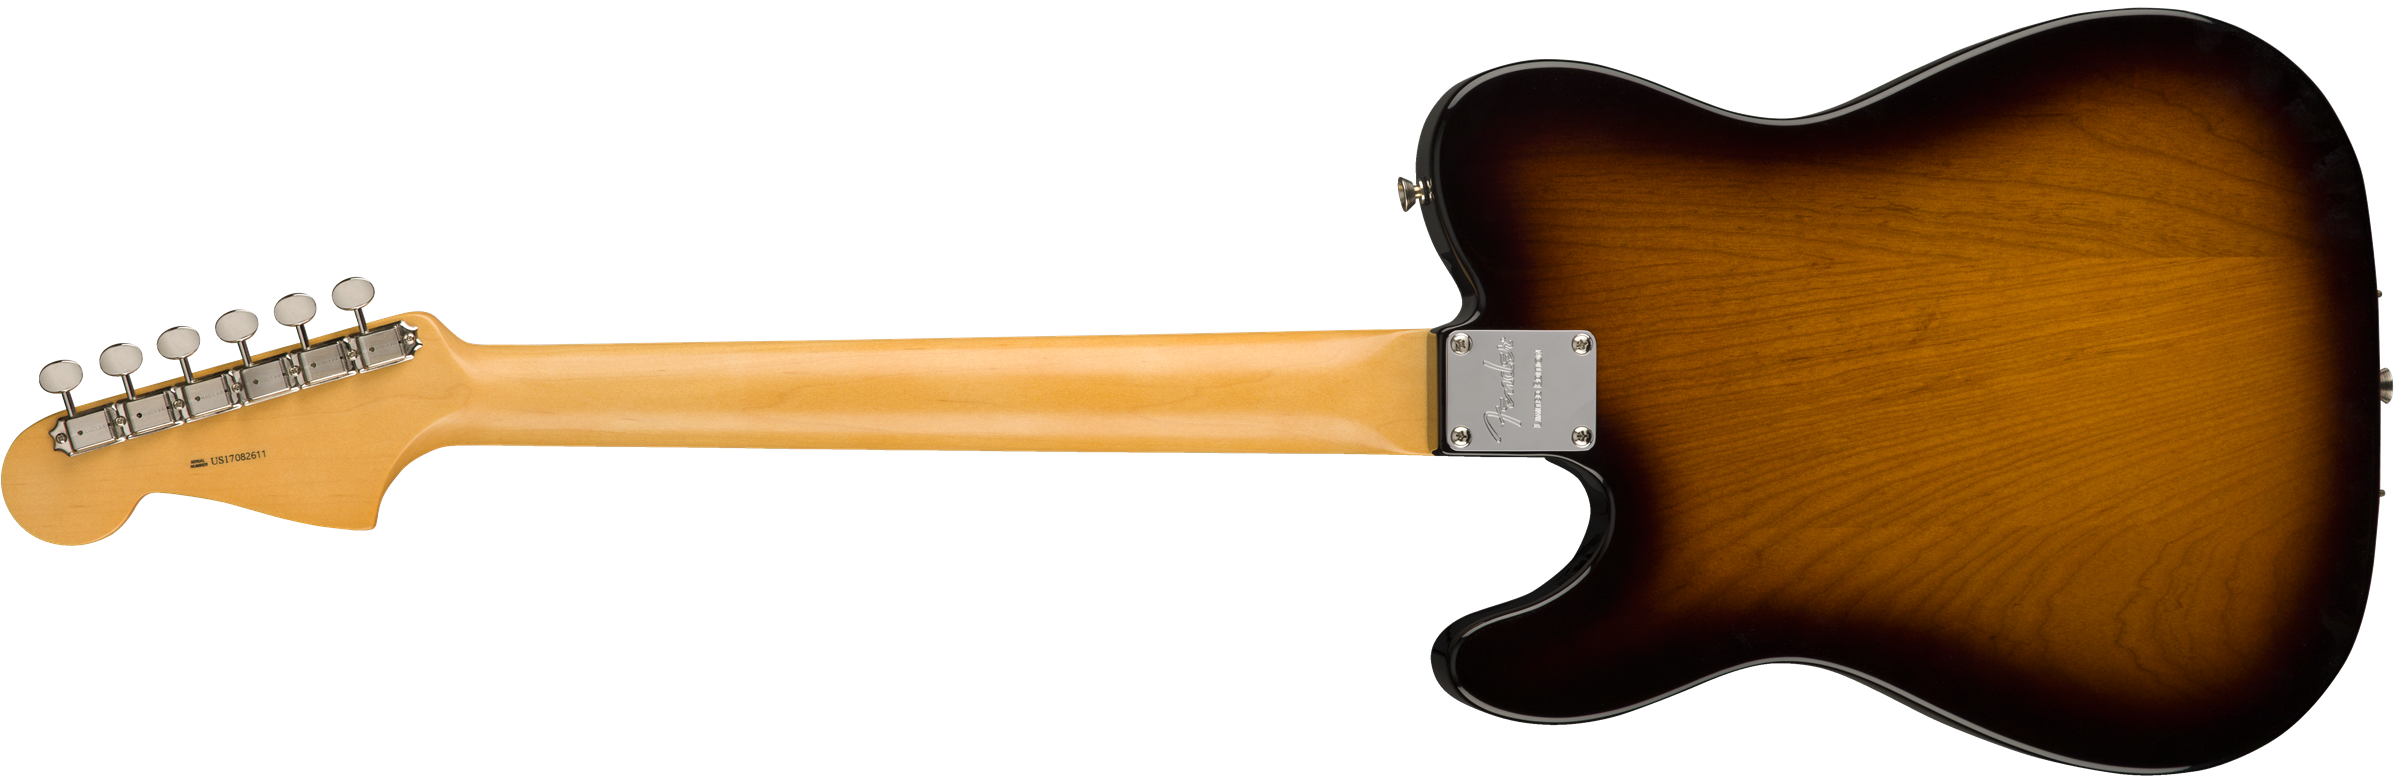 Fender Limited Edition Jazz Tele Parallel Universe Series in 2 Color Sunburst 0176010703 Last One SERIAL NUMBER US18008956 - 8.2 LBS